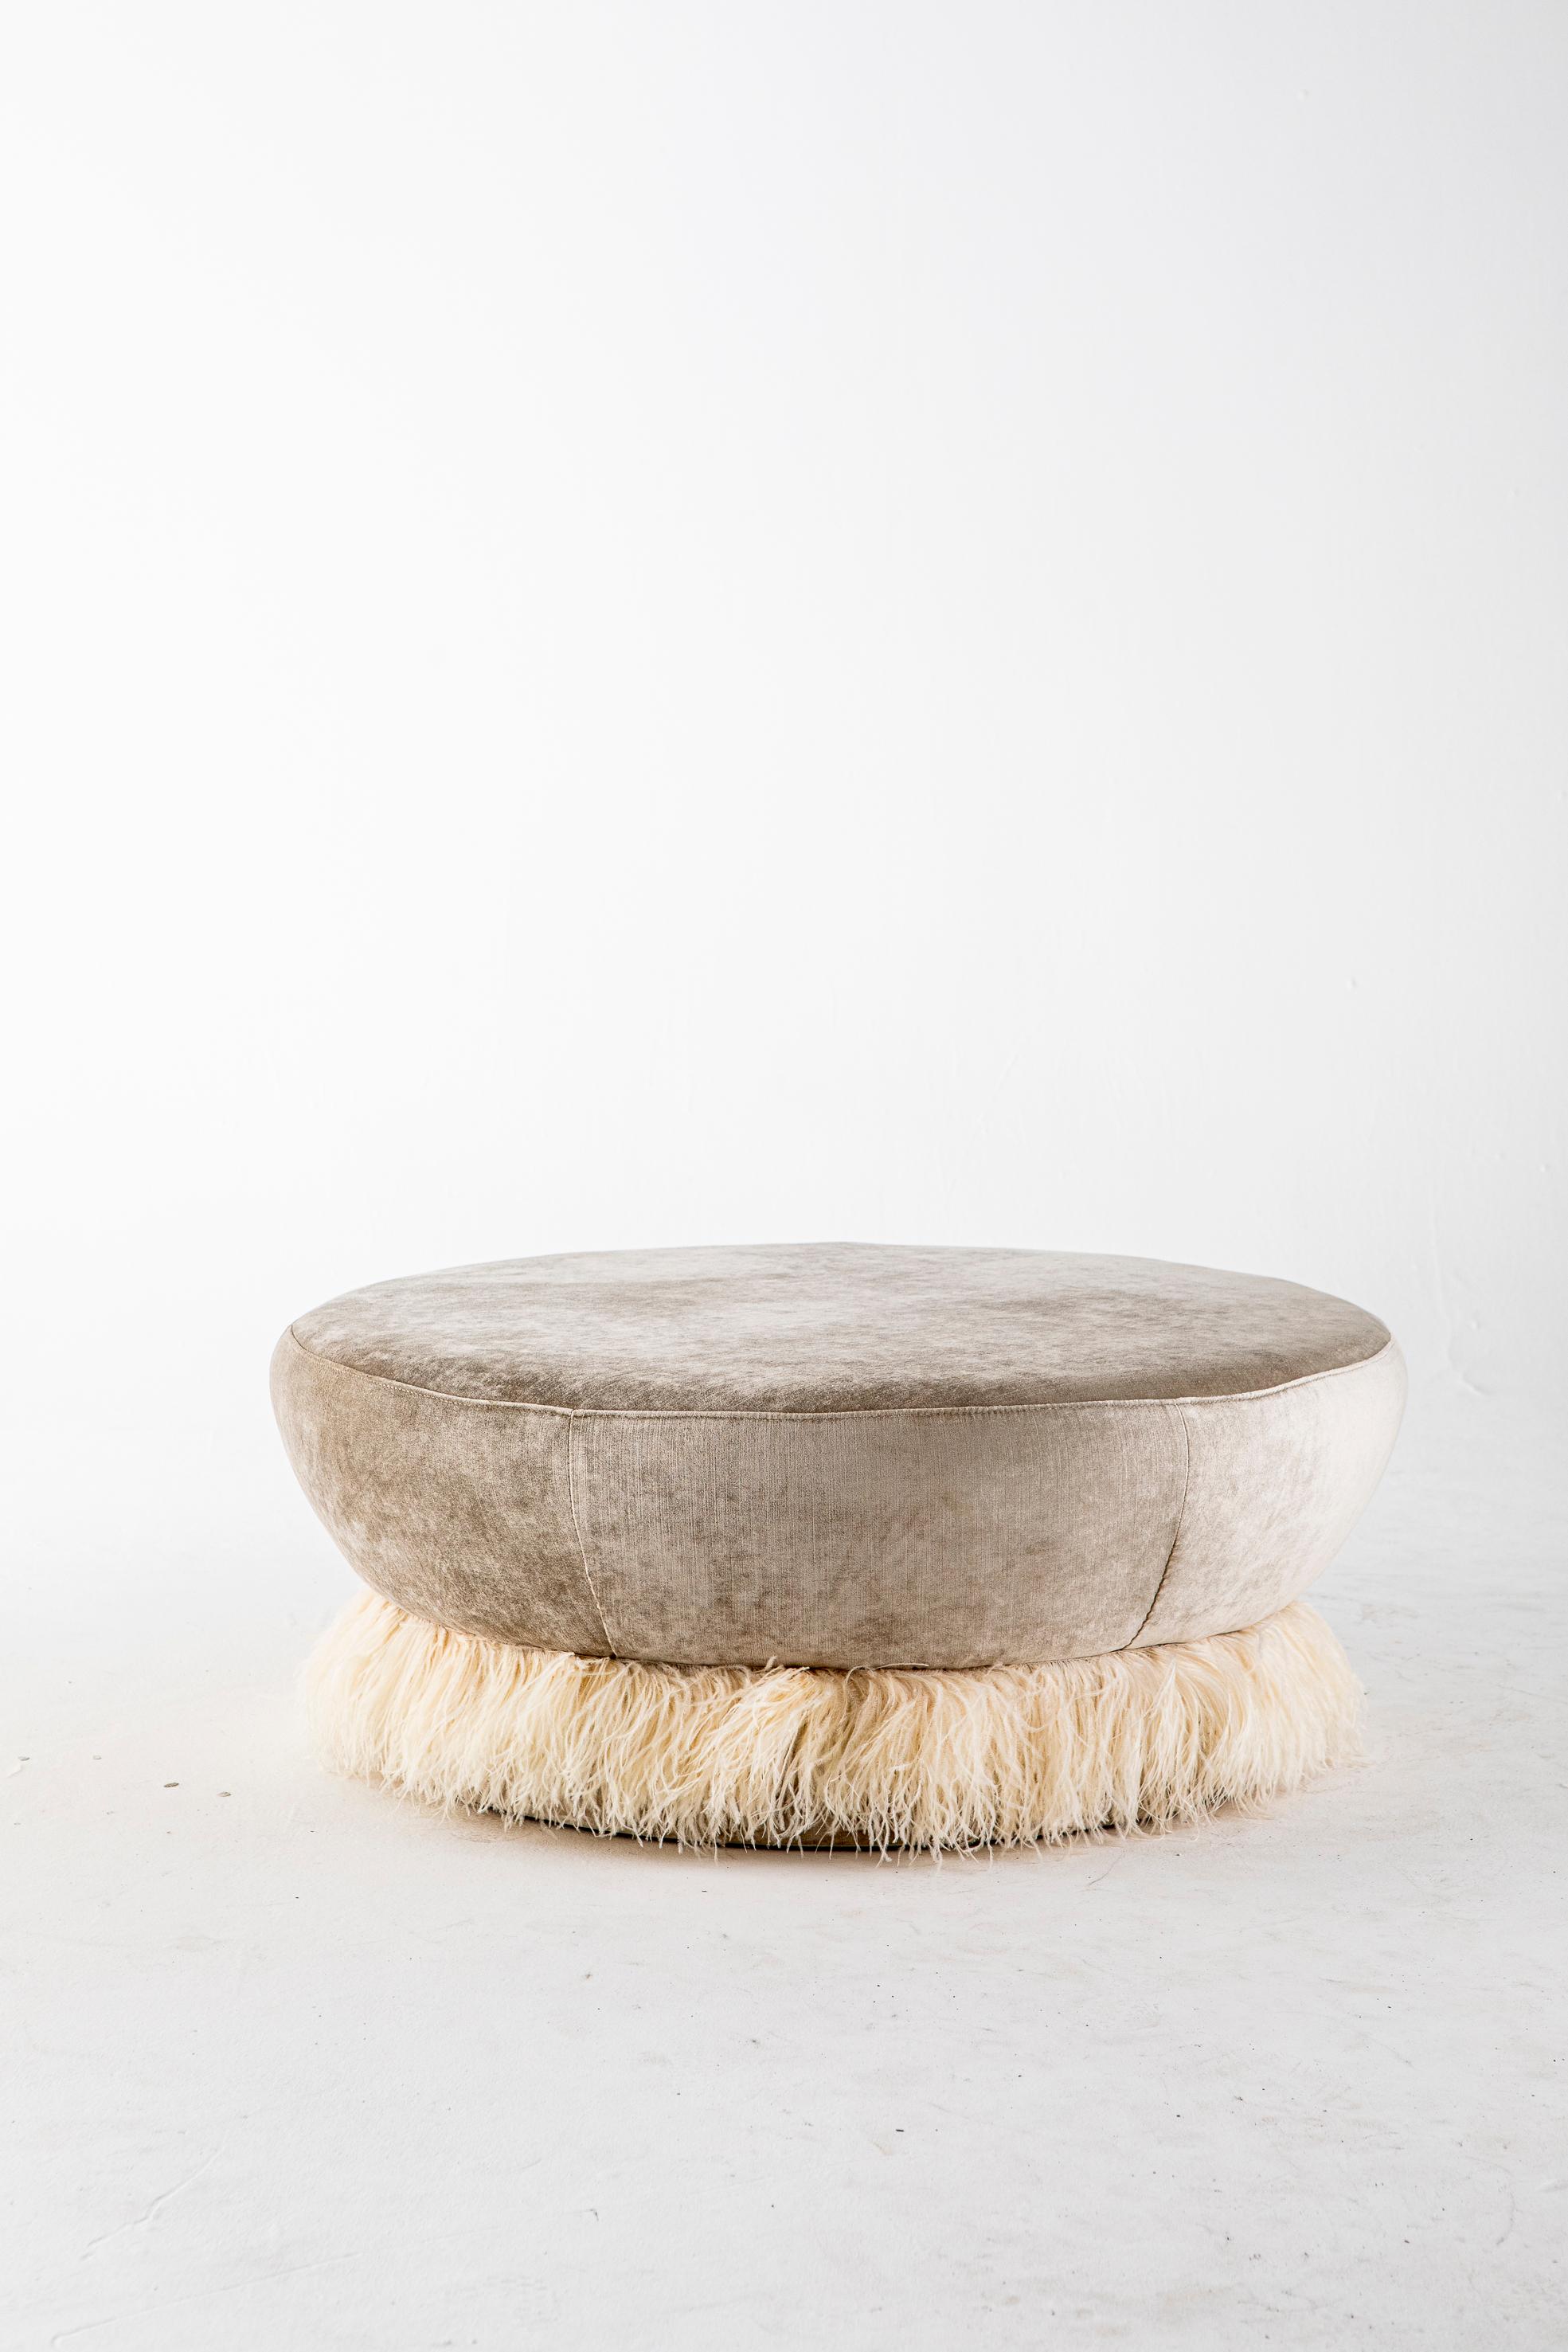 Large ostrich fluff ottoman by Egg Designs
Dimensions: 100 L x 100 D x 40 H cm
Materials: Ostrich feather trim, velvet upholstery

Founded by South Africans and life partners, Greg and Roche Dry - Egg is a unique perspective in contemporary